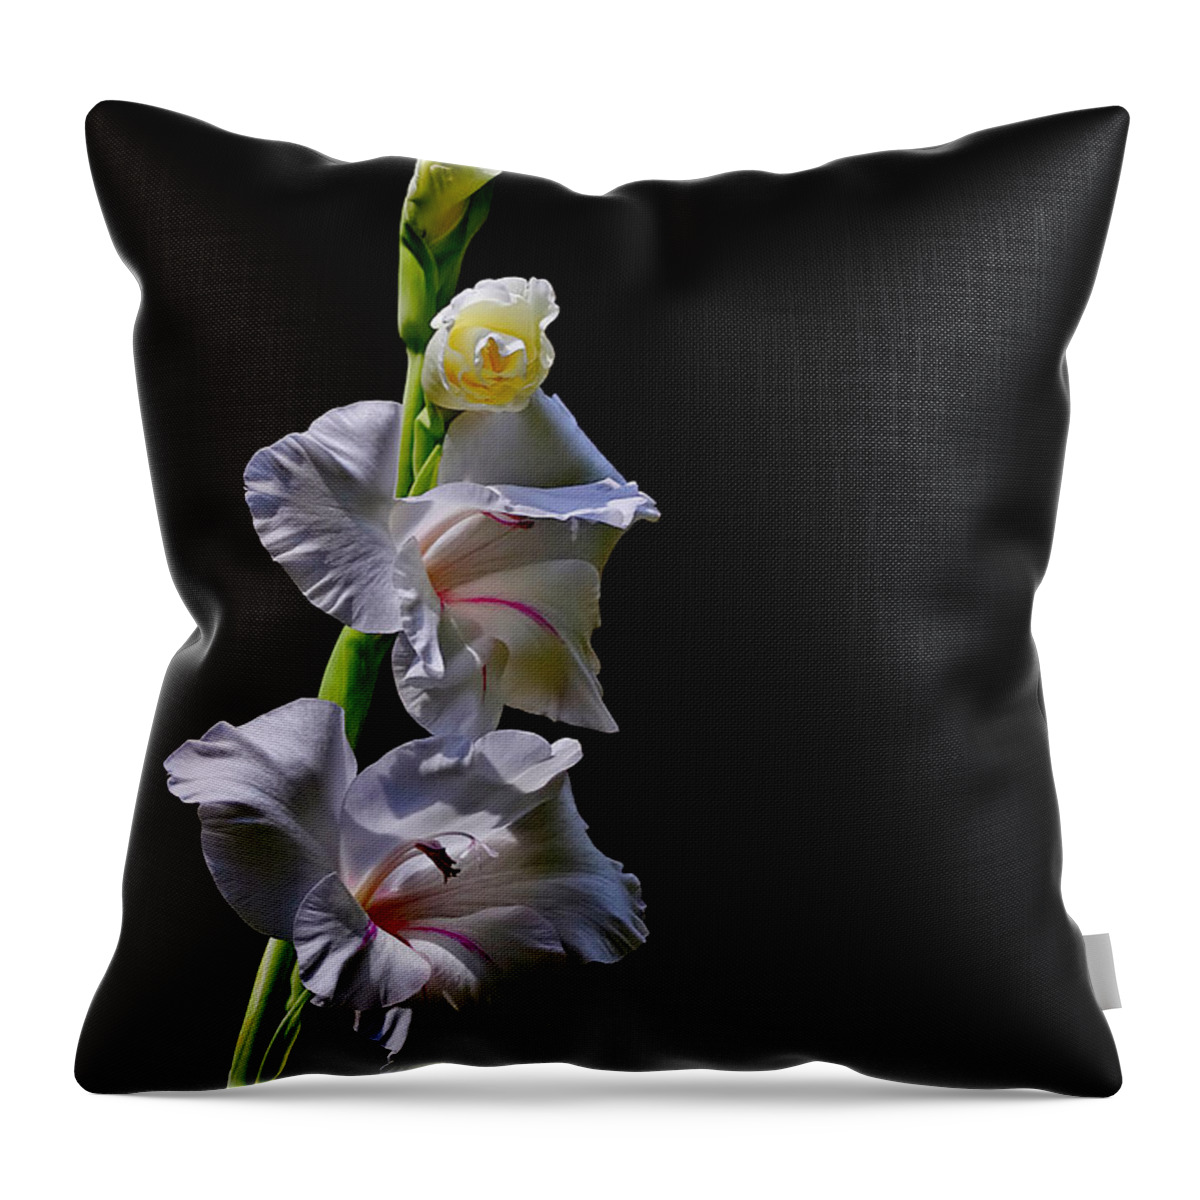 Flower Throw Pillow featuring the photograph Gladiola #1 by Farol Tomson